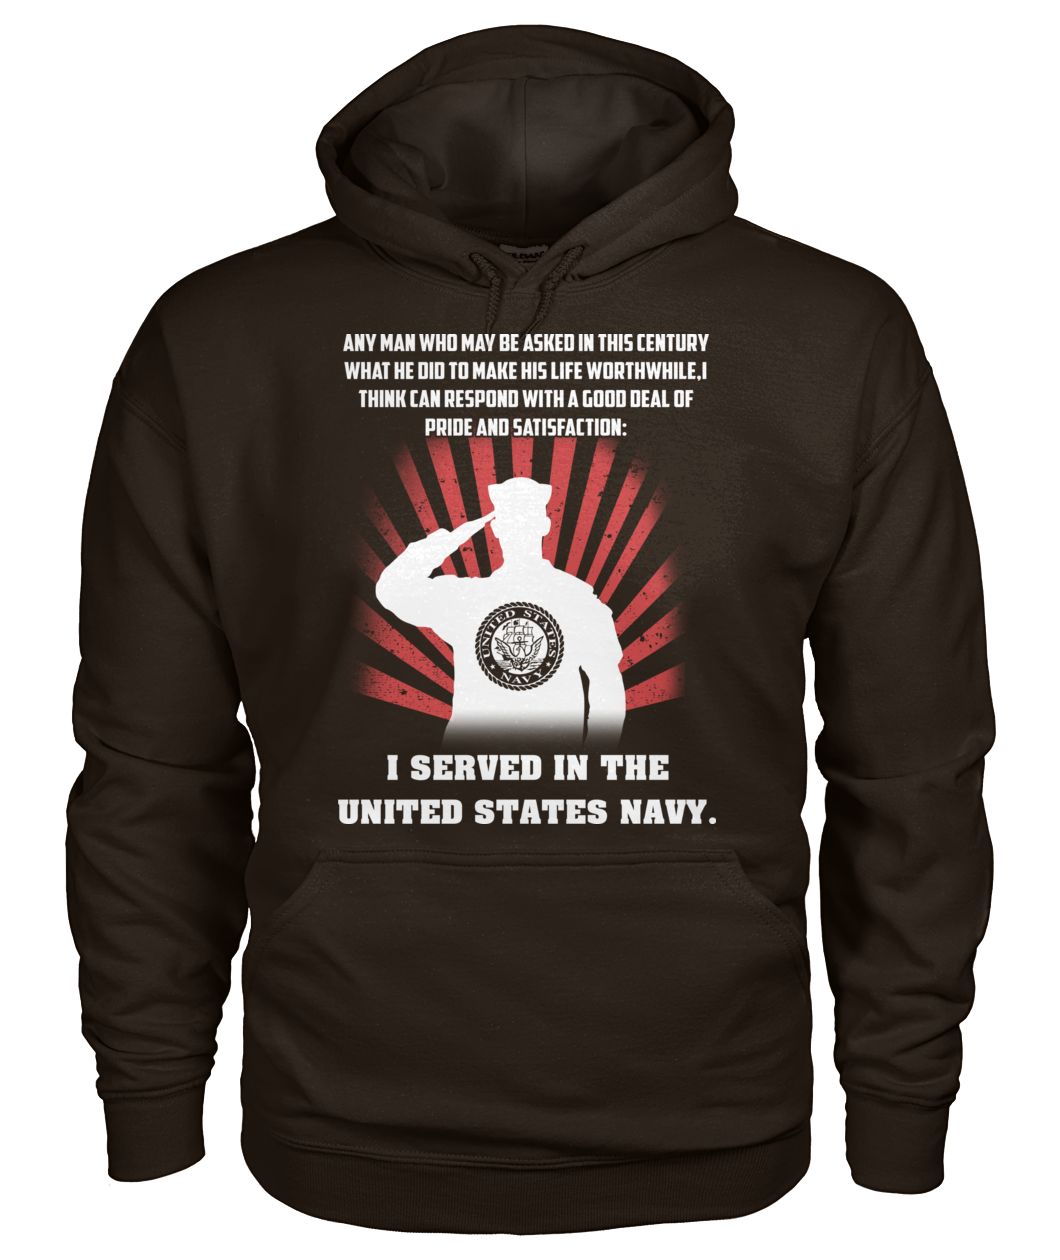 US sailor army any man who may be asked in this century what he did to make his life worthwhile gildan hoodie